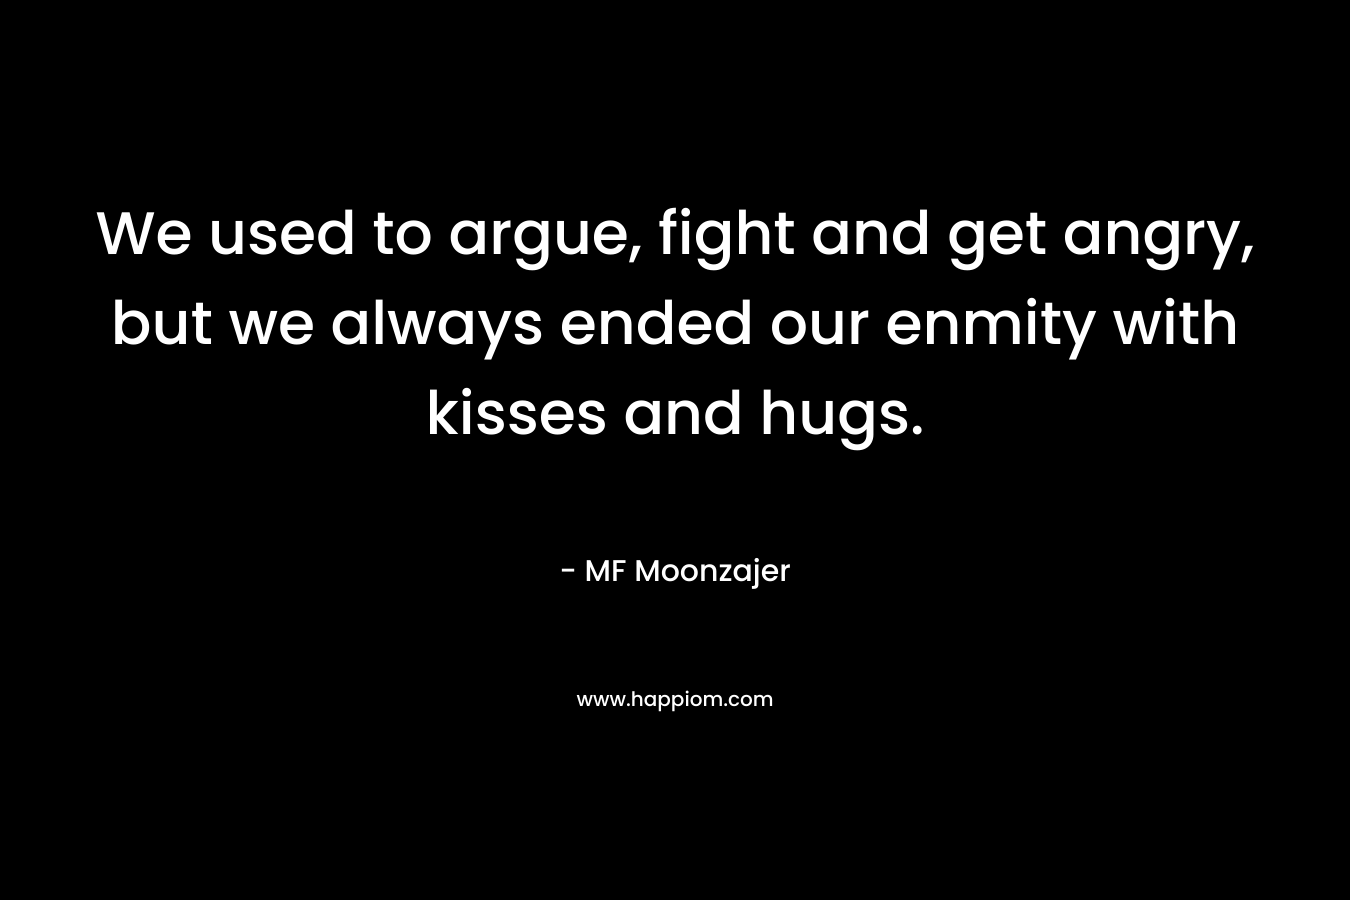 We used to argue, fight and get angry, but we always ended our enmity with kisses and hugs. – MF Moonzajer